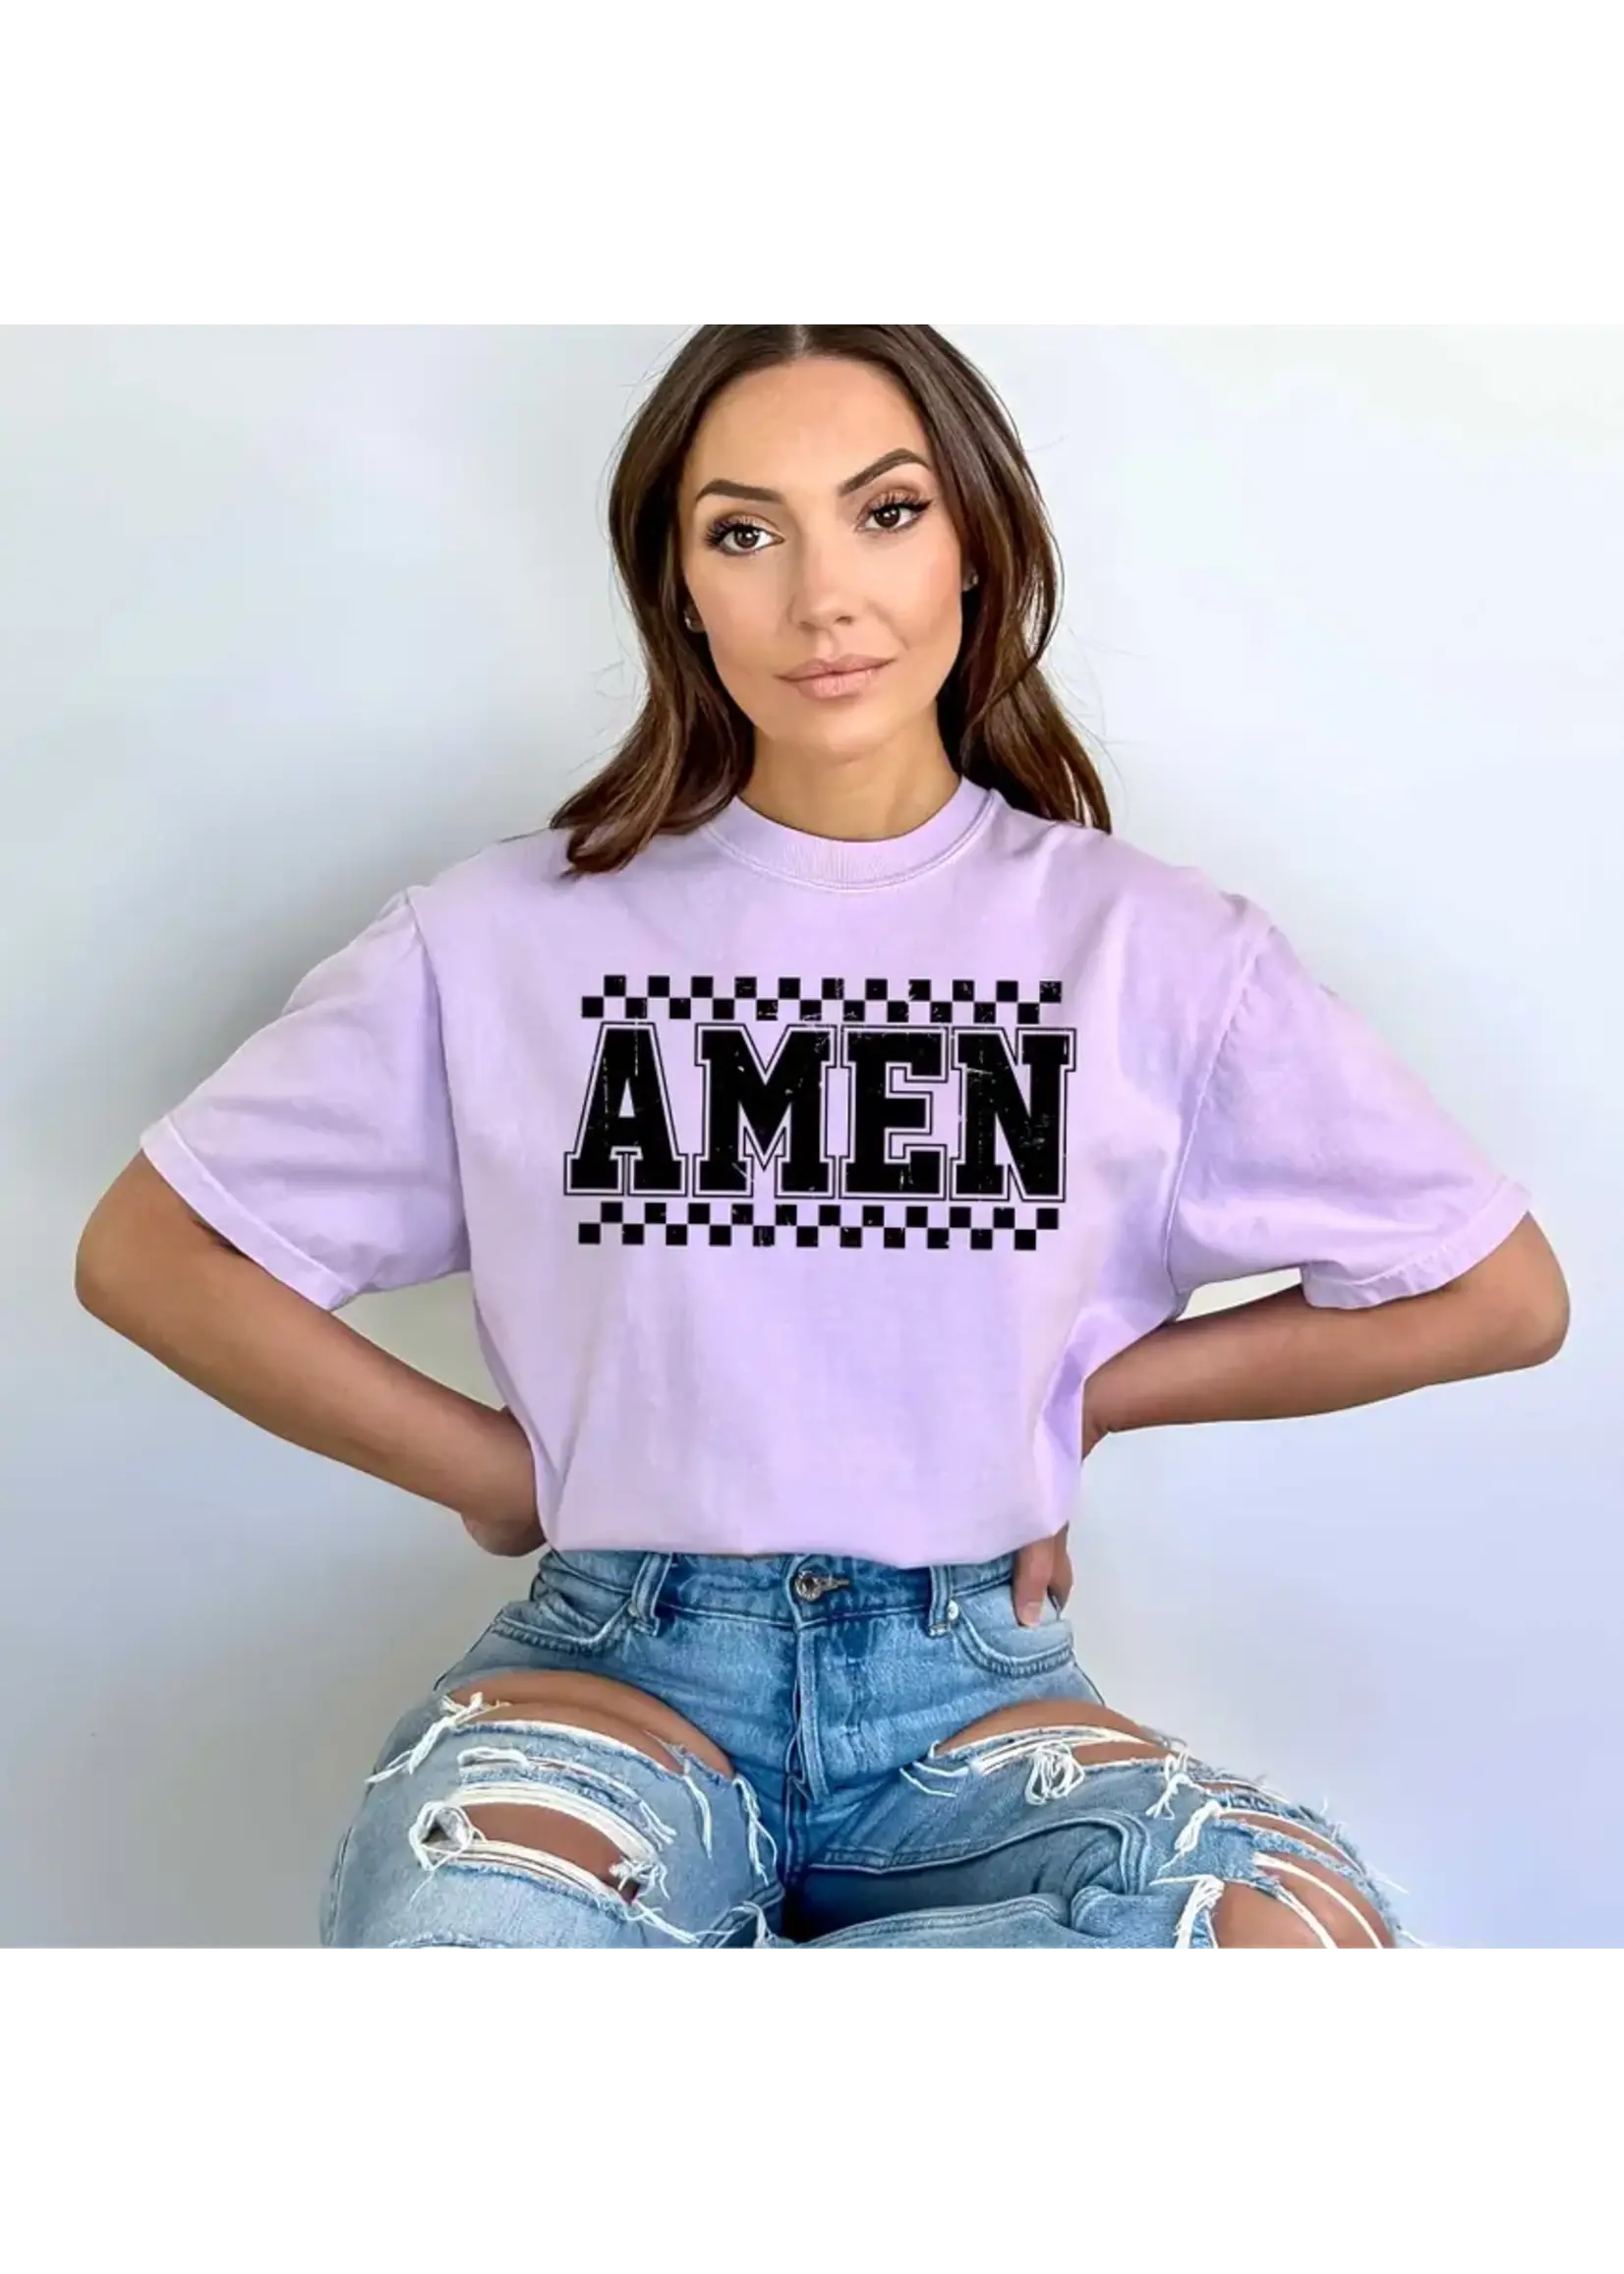 Uplifting Threads Co "AMEN" Graphic Tee